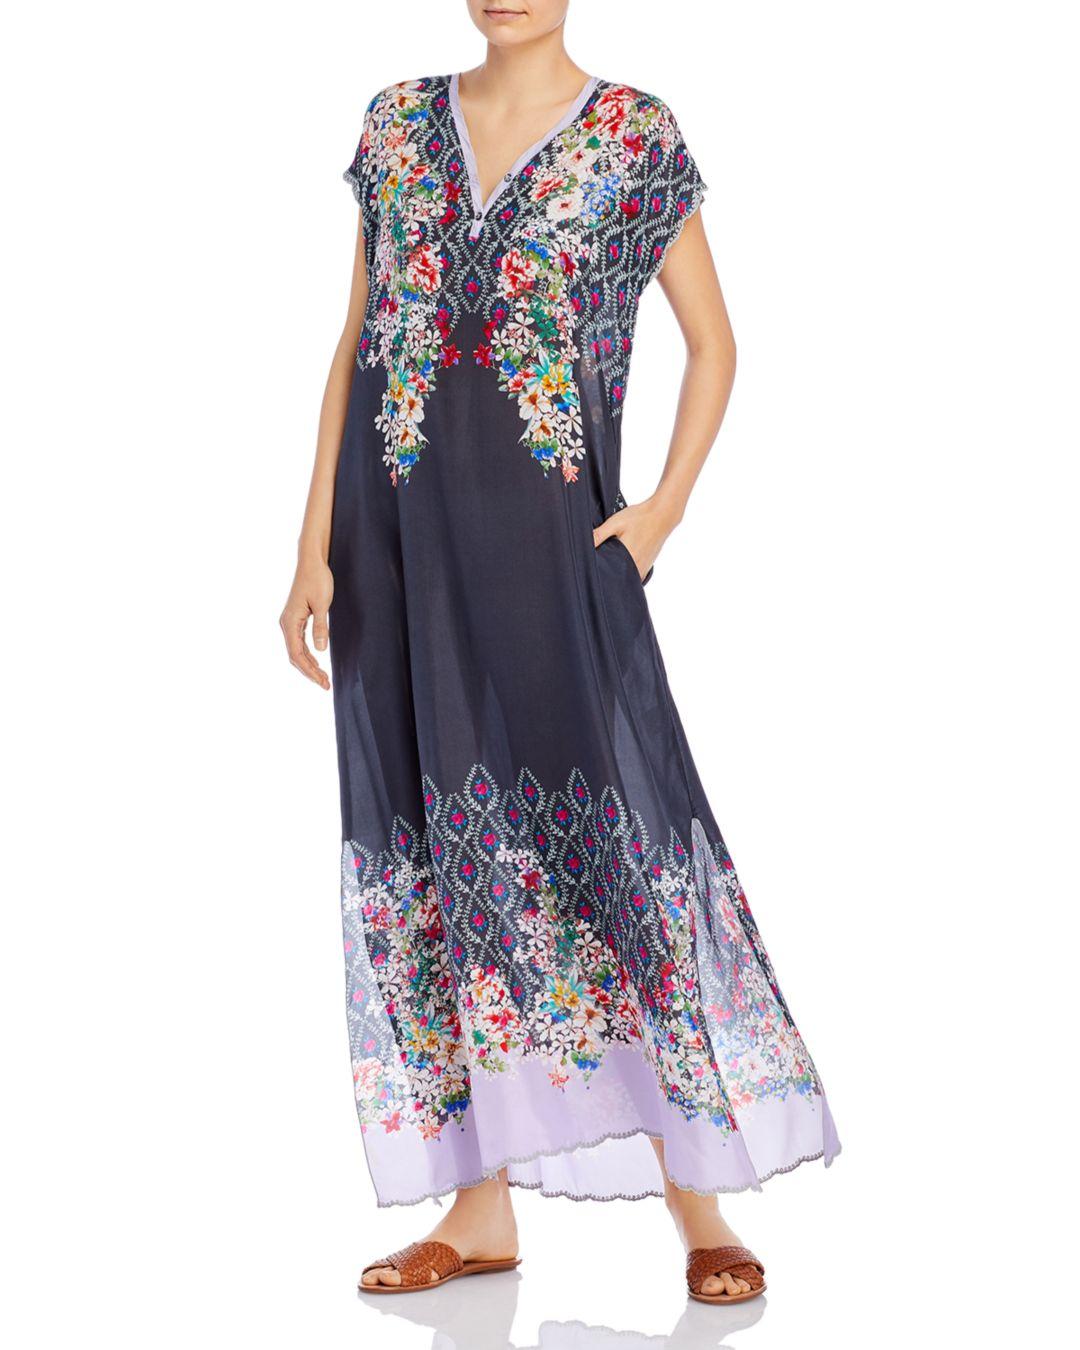 Johnny Was Synthetic Mystic Midi Dress in Blue - Lyst